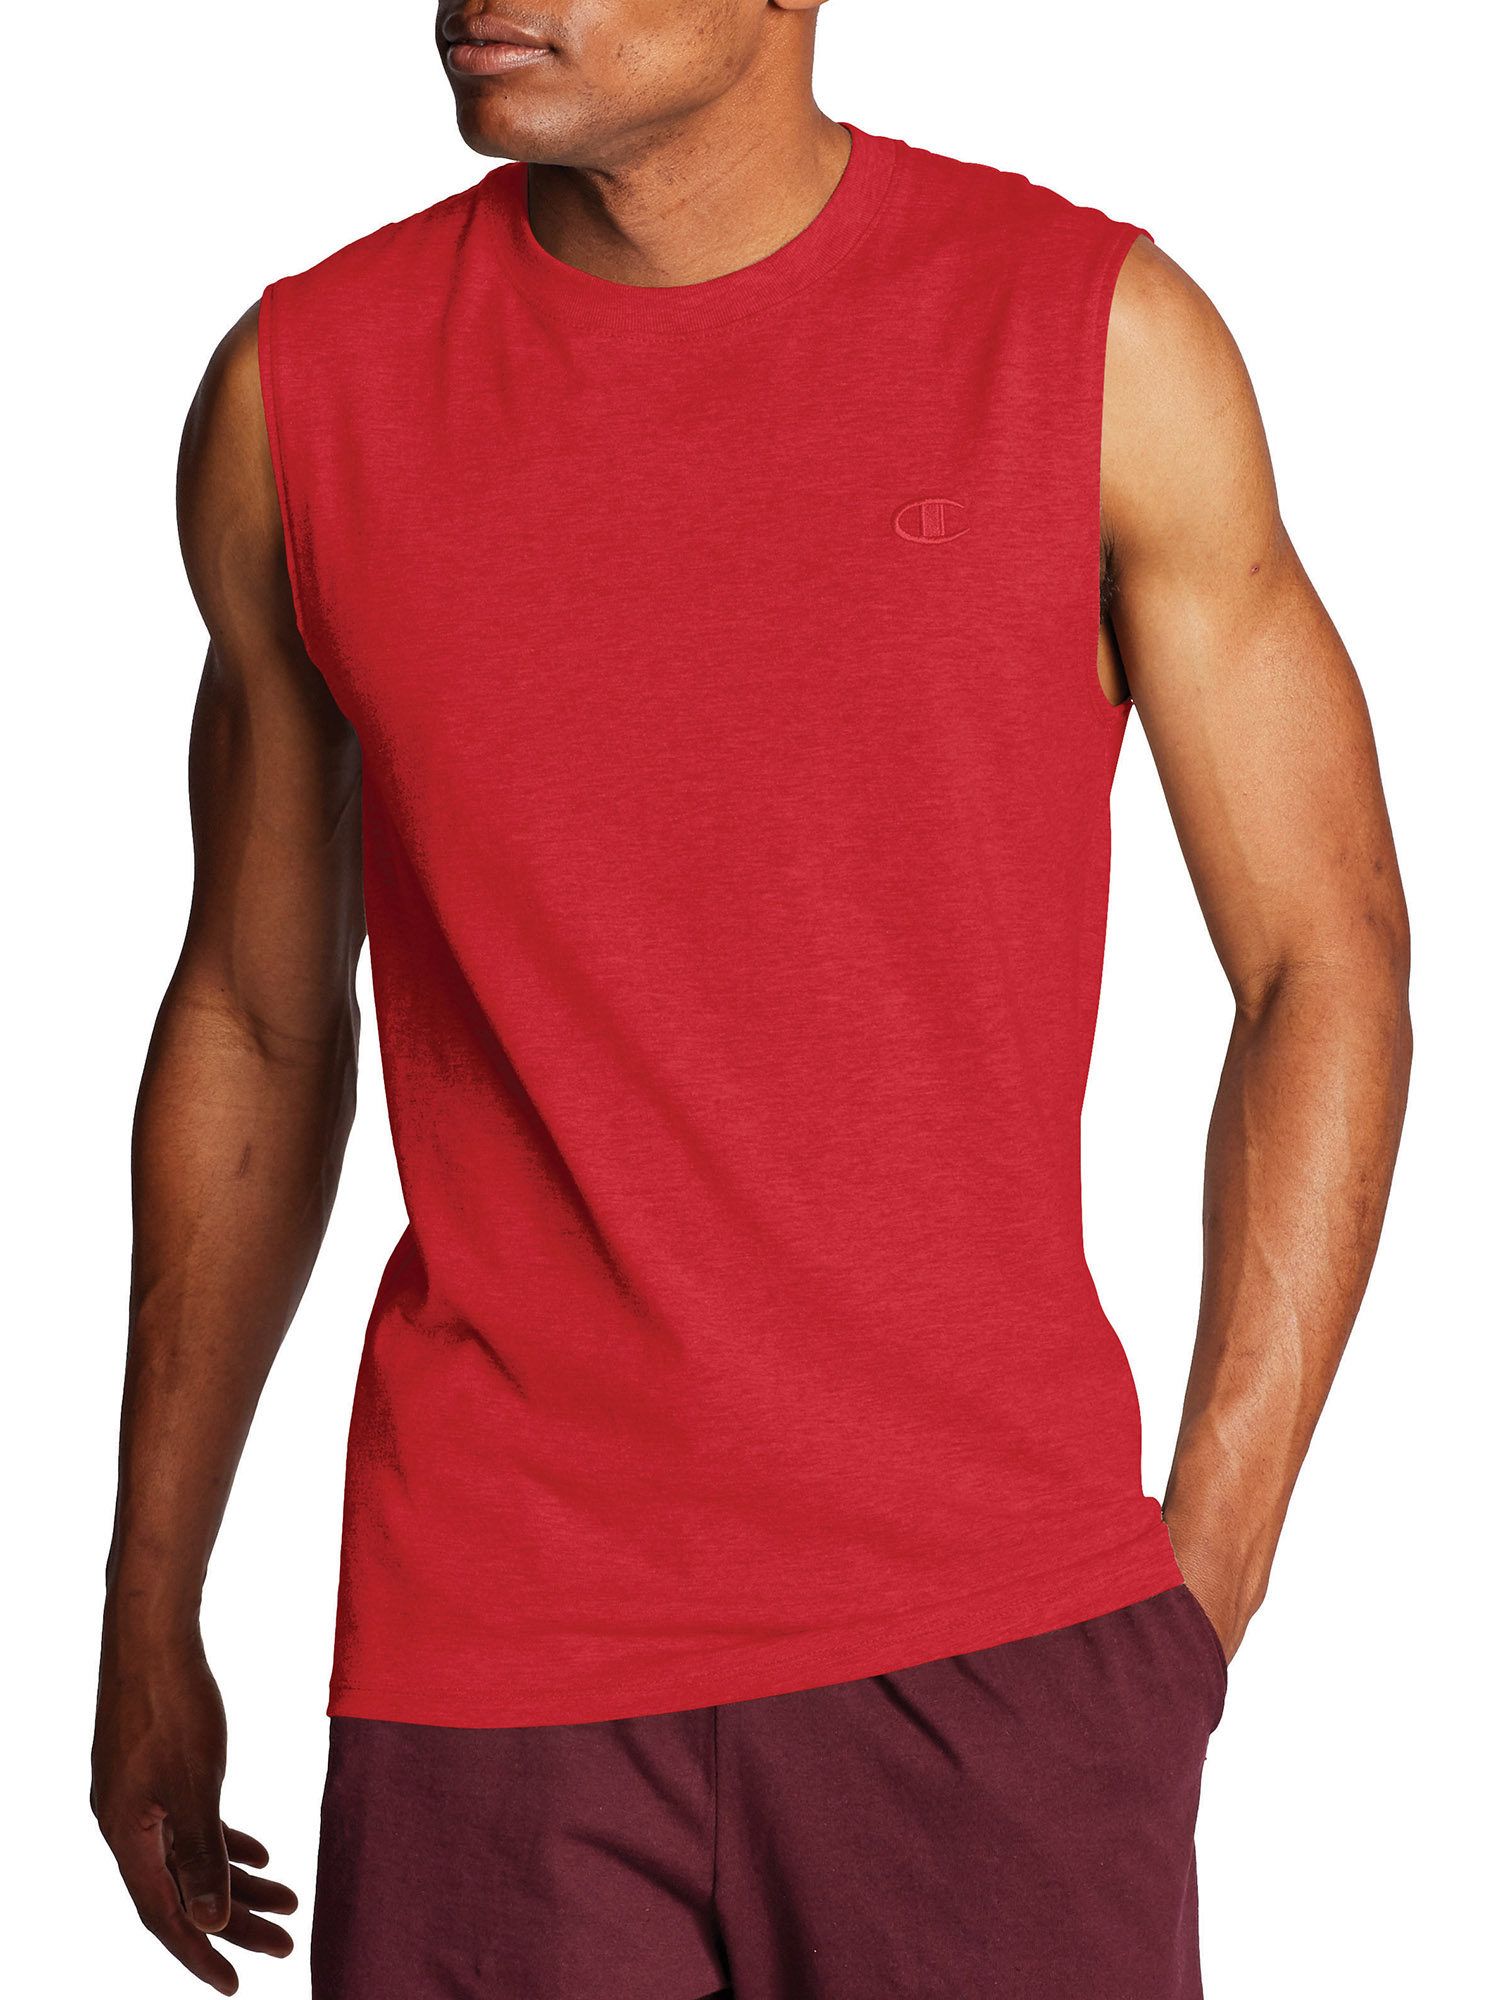 Champion Mens Jersey Atheltic Fit Muscle Tee Classic Cotton T-Shirt Sleeveless